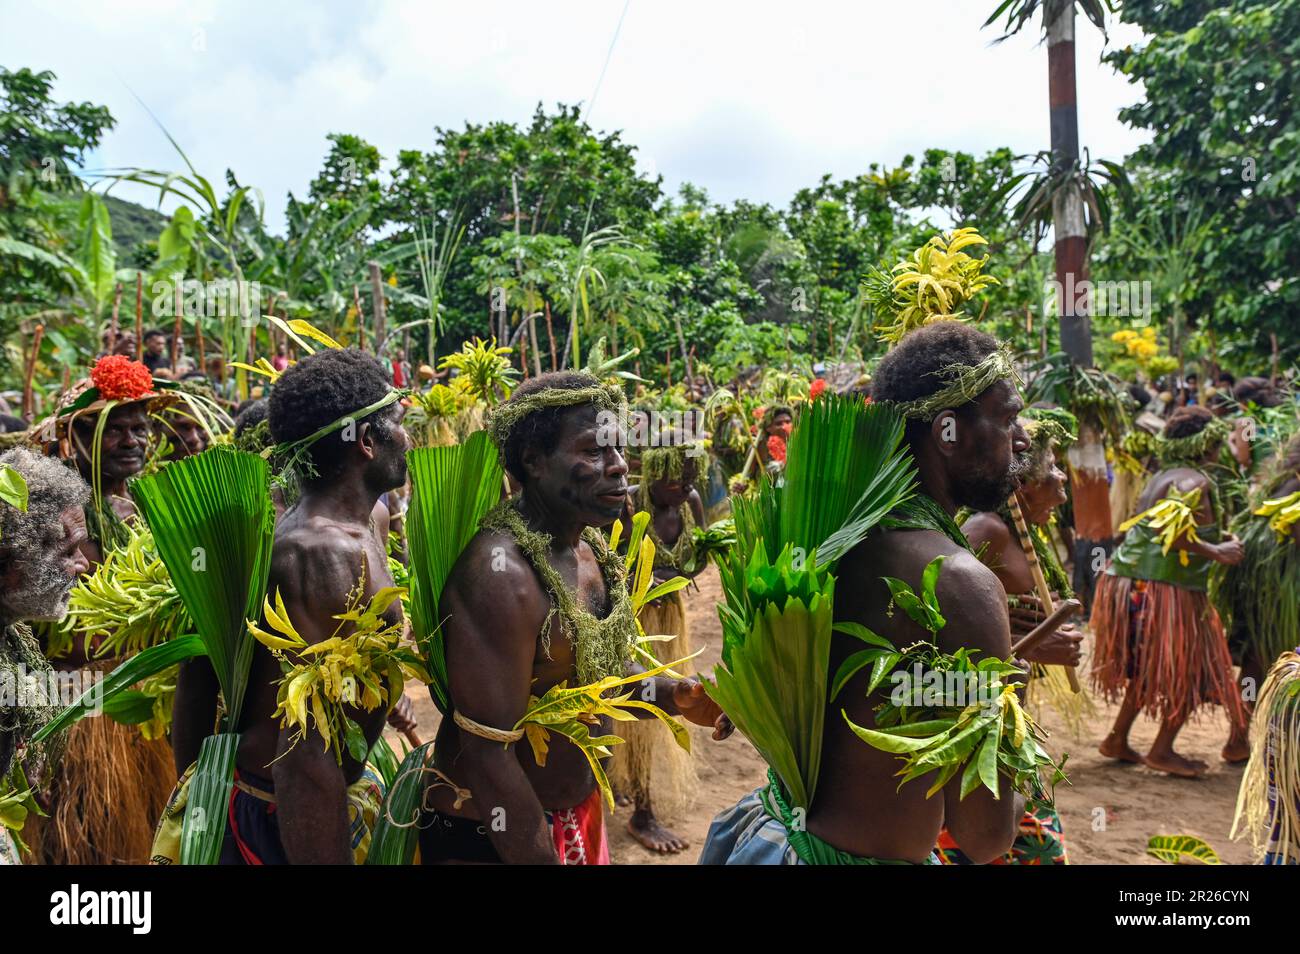 The traditional dances of the indigenous people on Utupua Island in the Solomon Islands are rich in cultural significance and often accompanied by music and rhythmic movements. The welcome Dance is performed to welcome guests or visitors to the community. It typically features vibrant costumes, joyful movements, and expressions of hospitality and warmth. Others include the War Dance, the Bamboo Dance or the Harvest Dance. Stock Photo